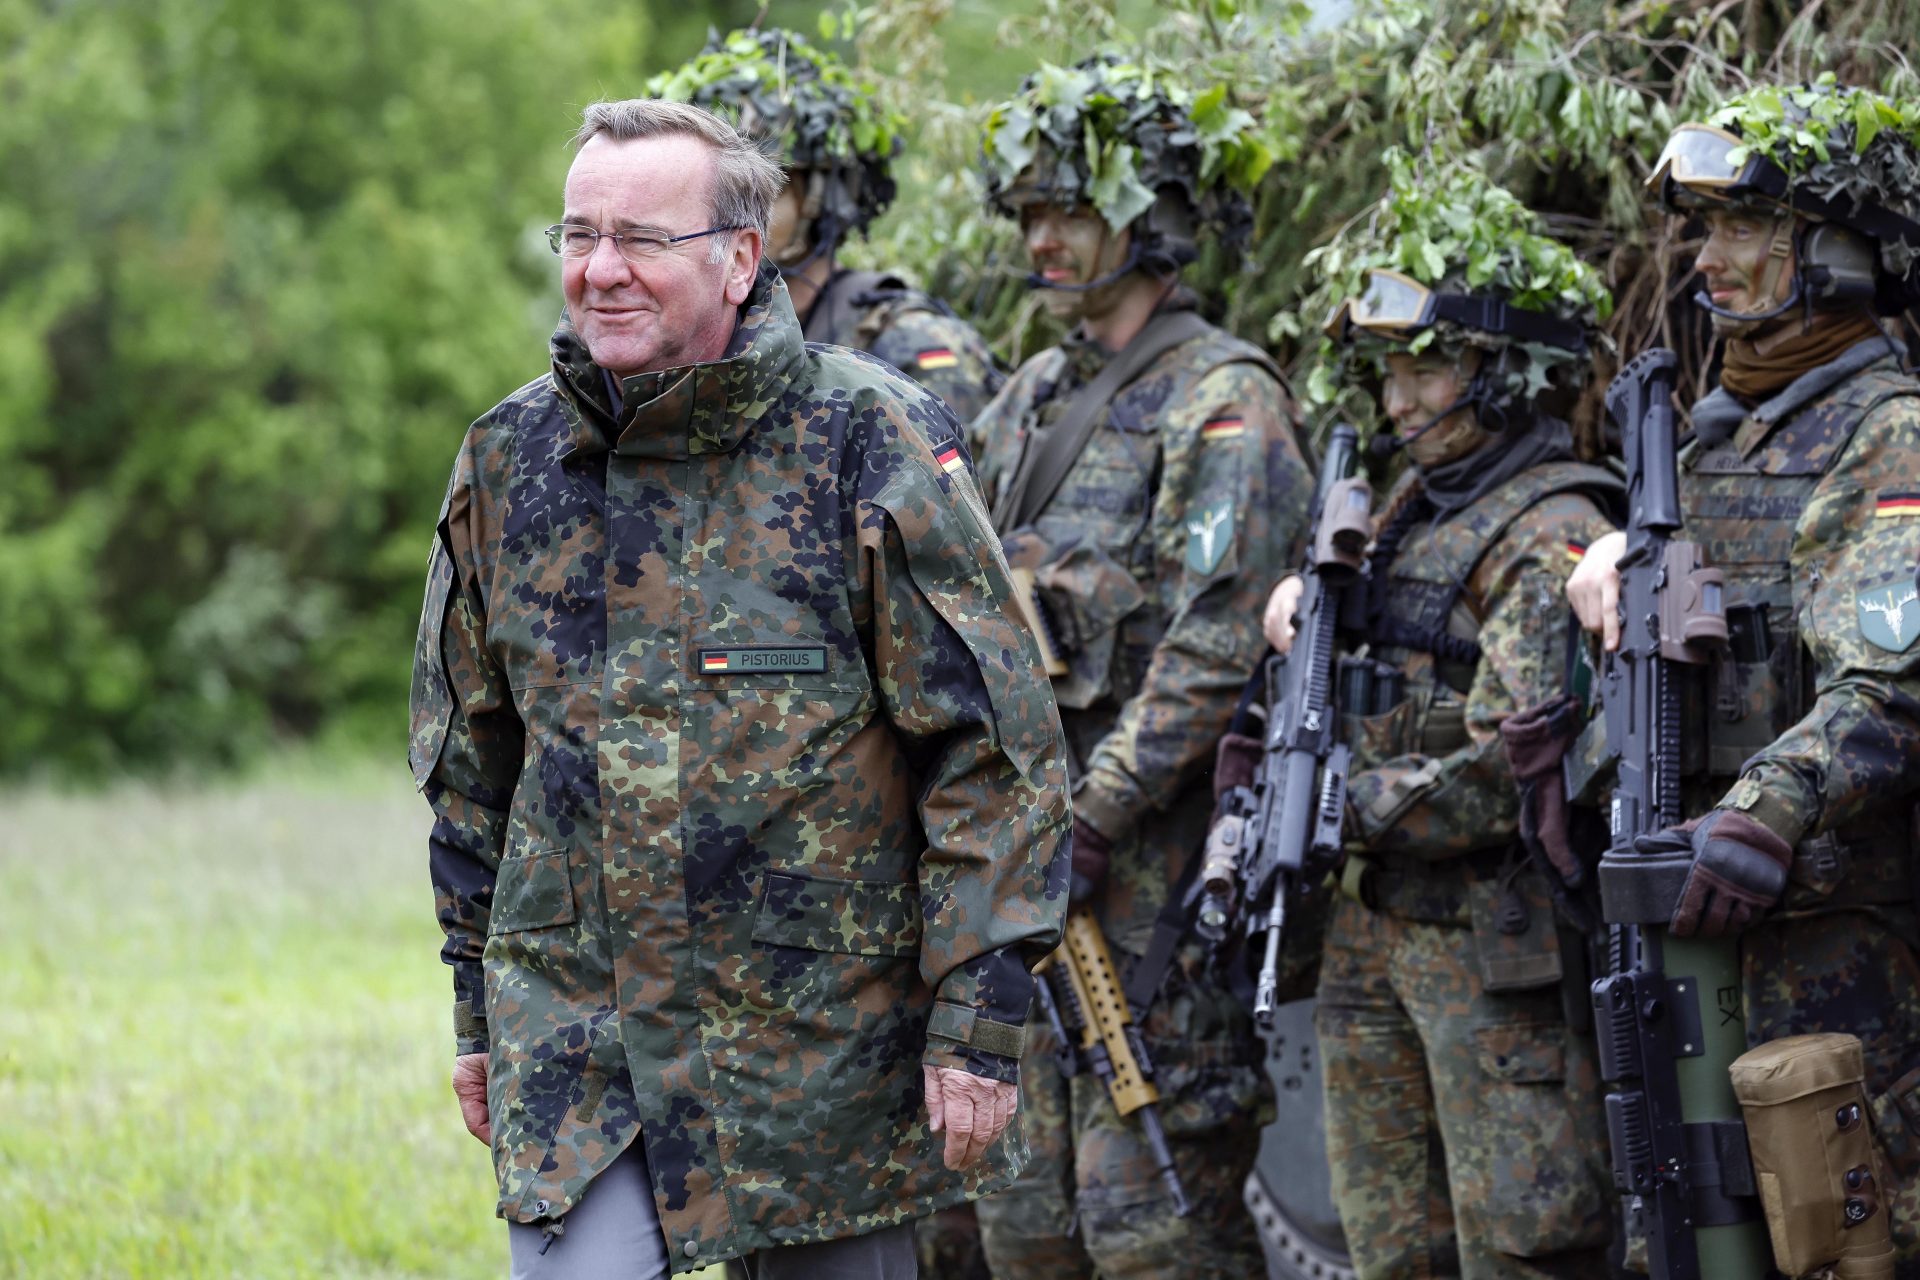 A warning from Germany’s Minister of Defense 